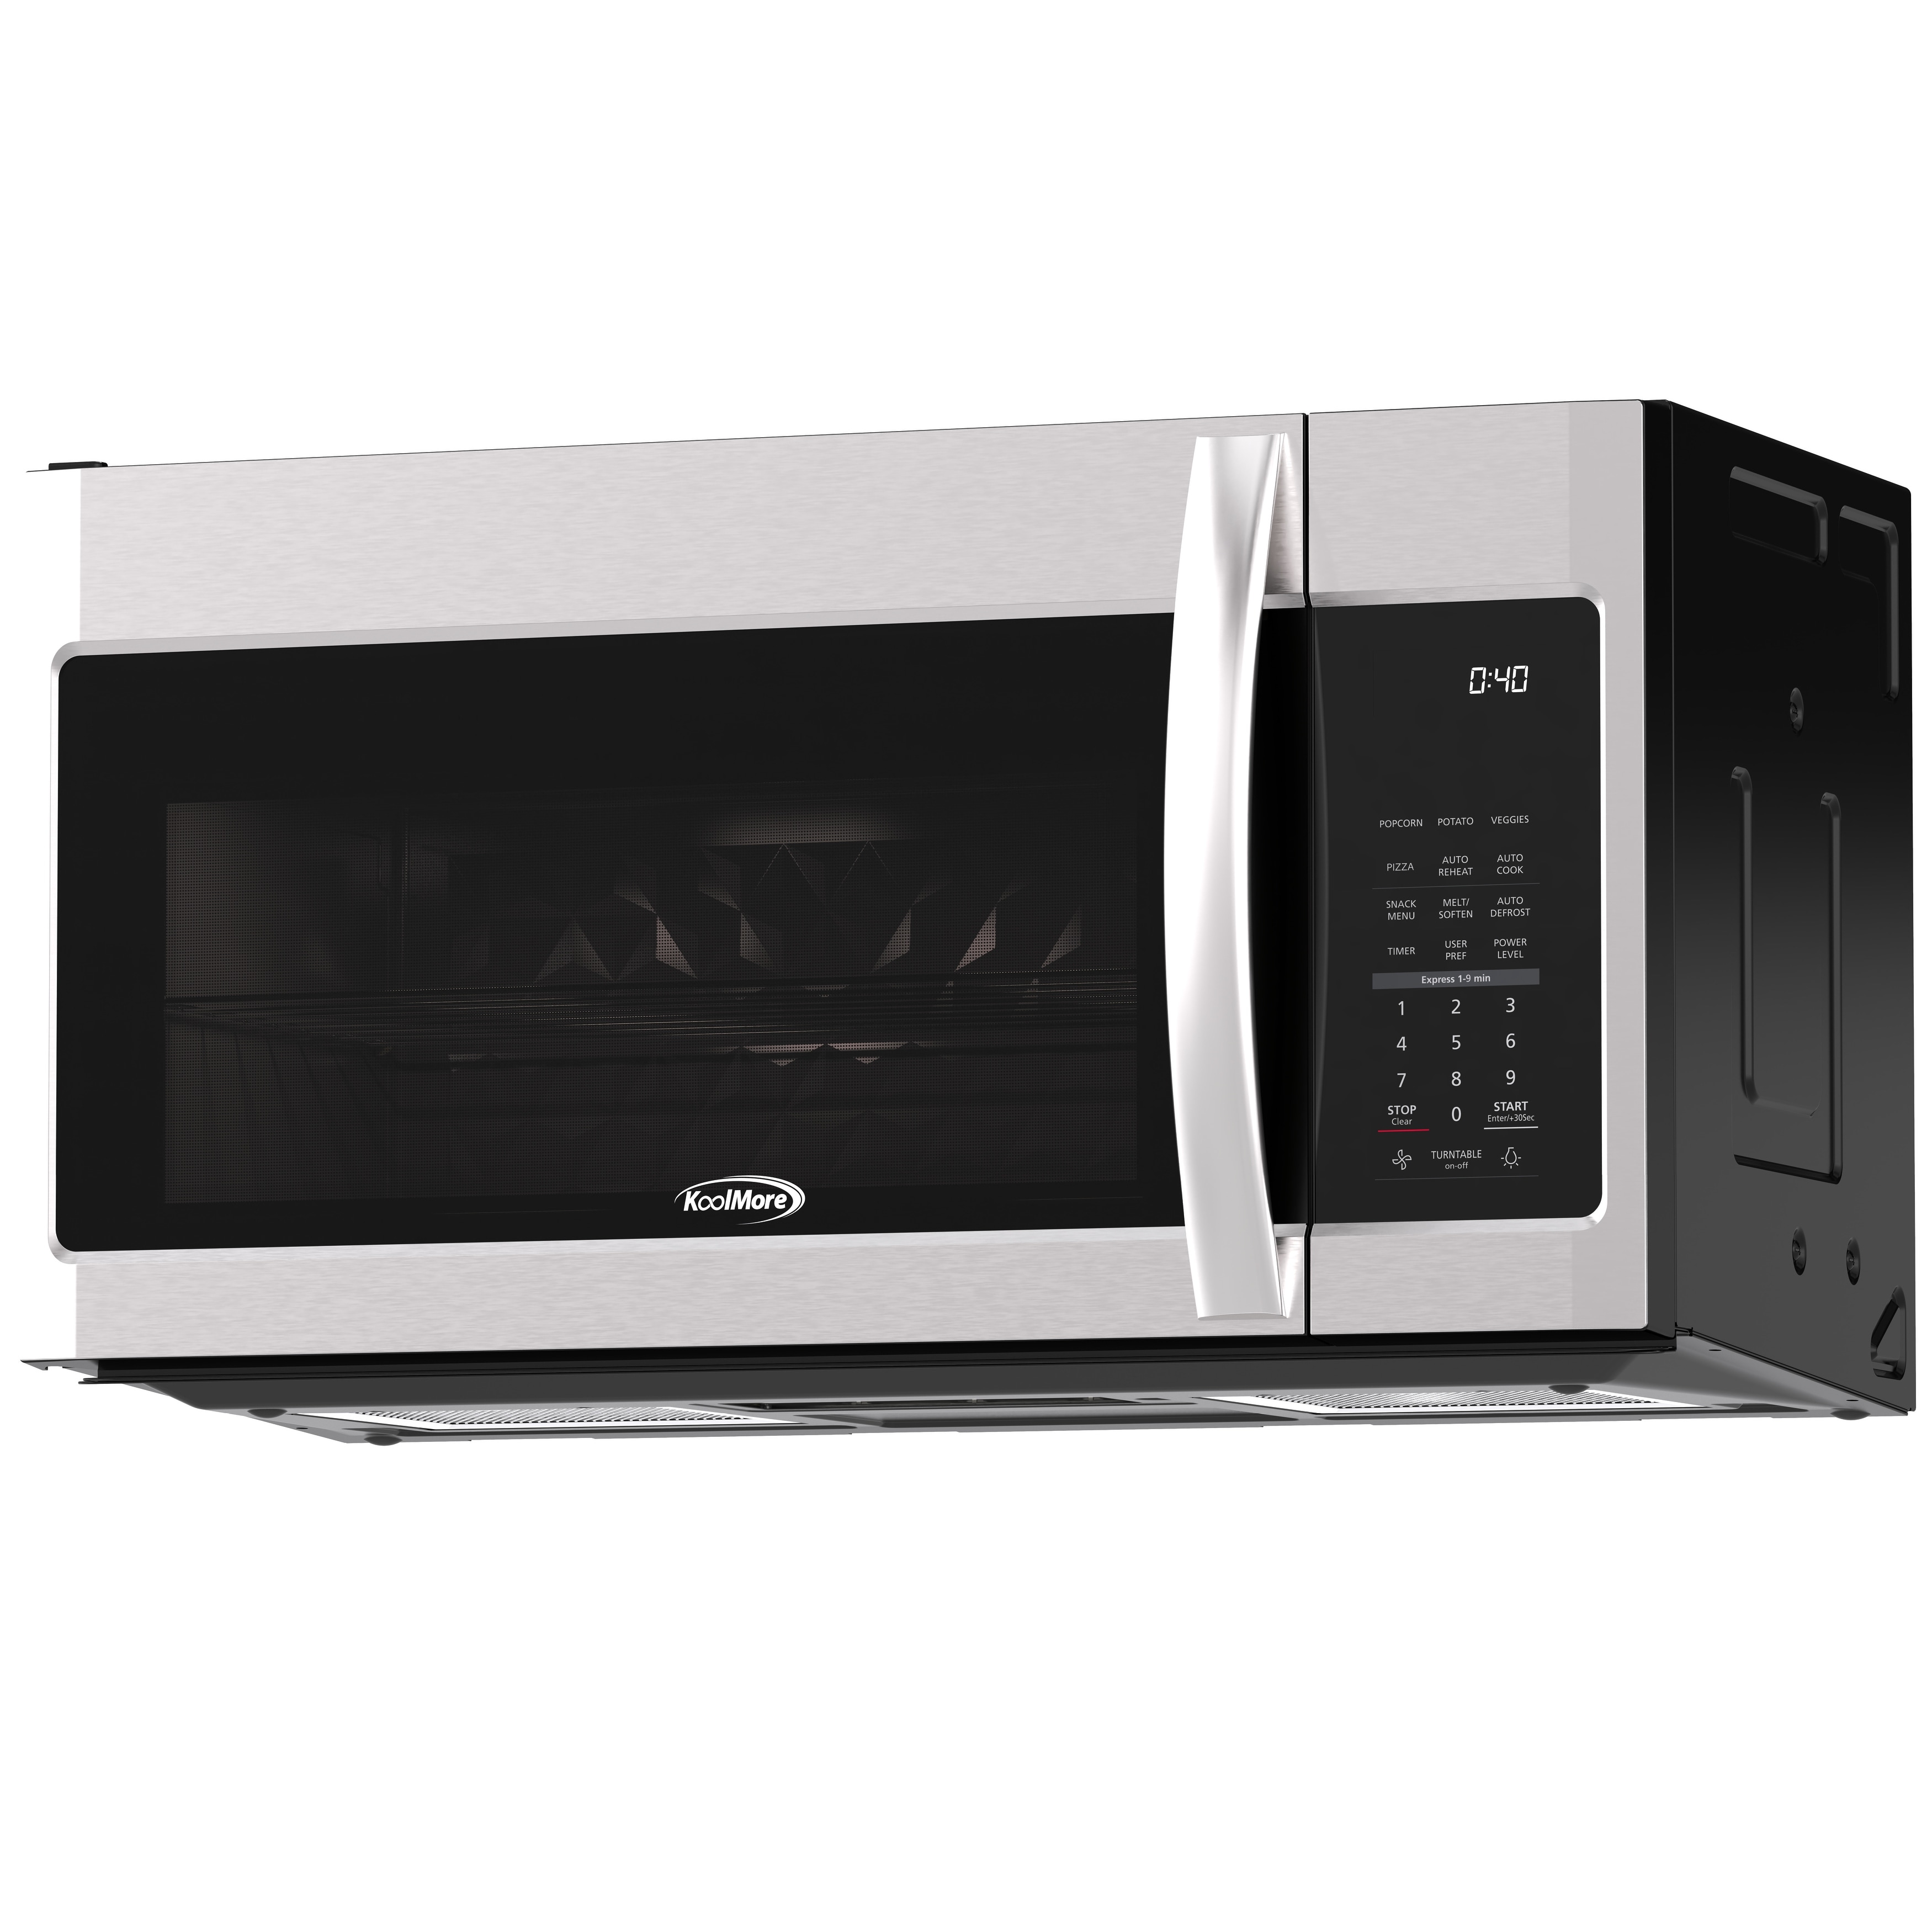 1.9 Cu. Ft. Over the Range Microwave Oven with Ove...